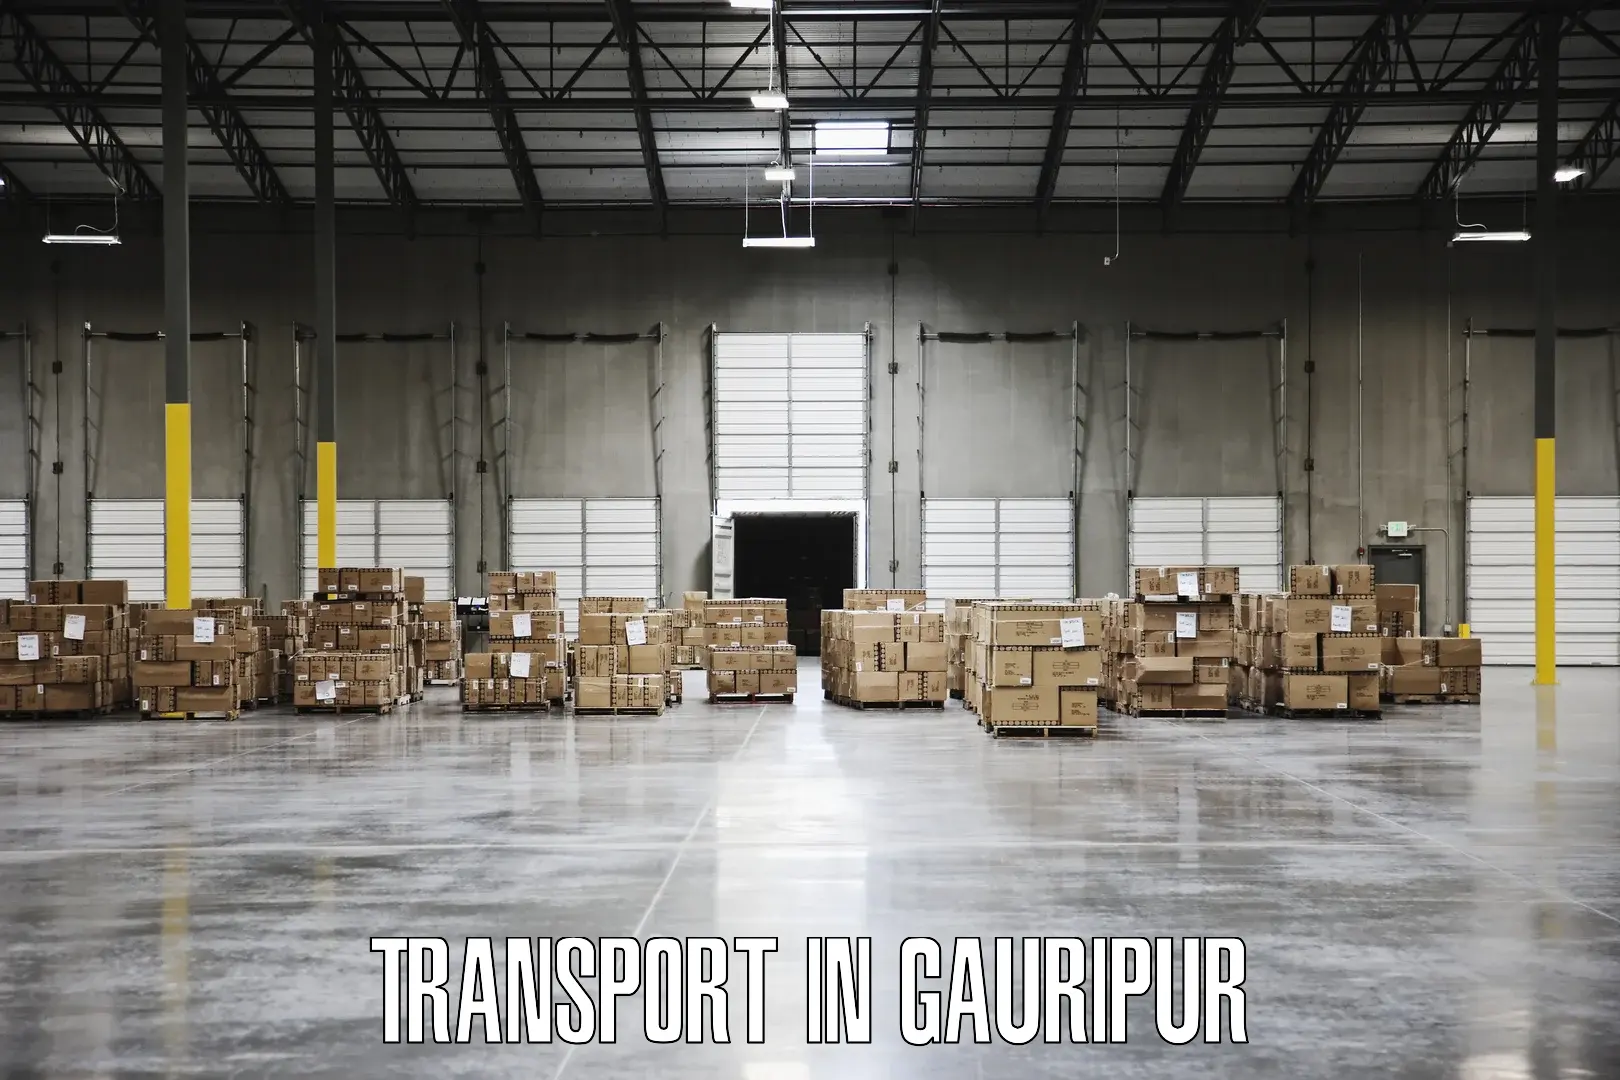 Daily transport service in Gauripur